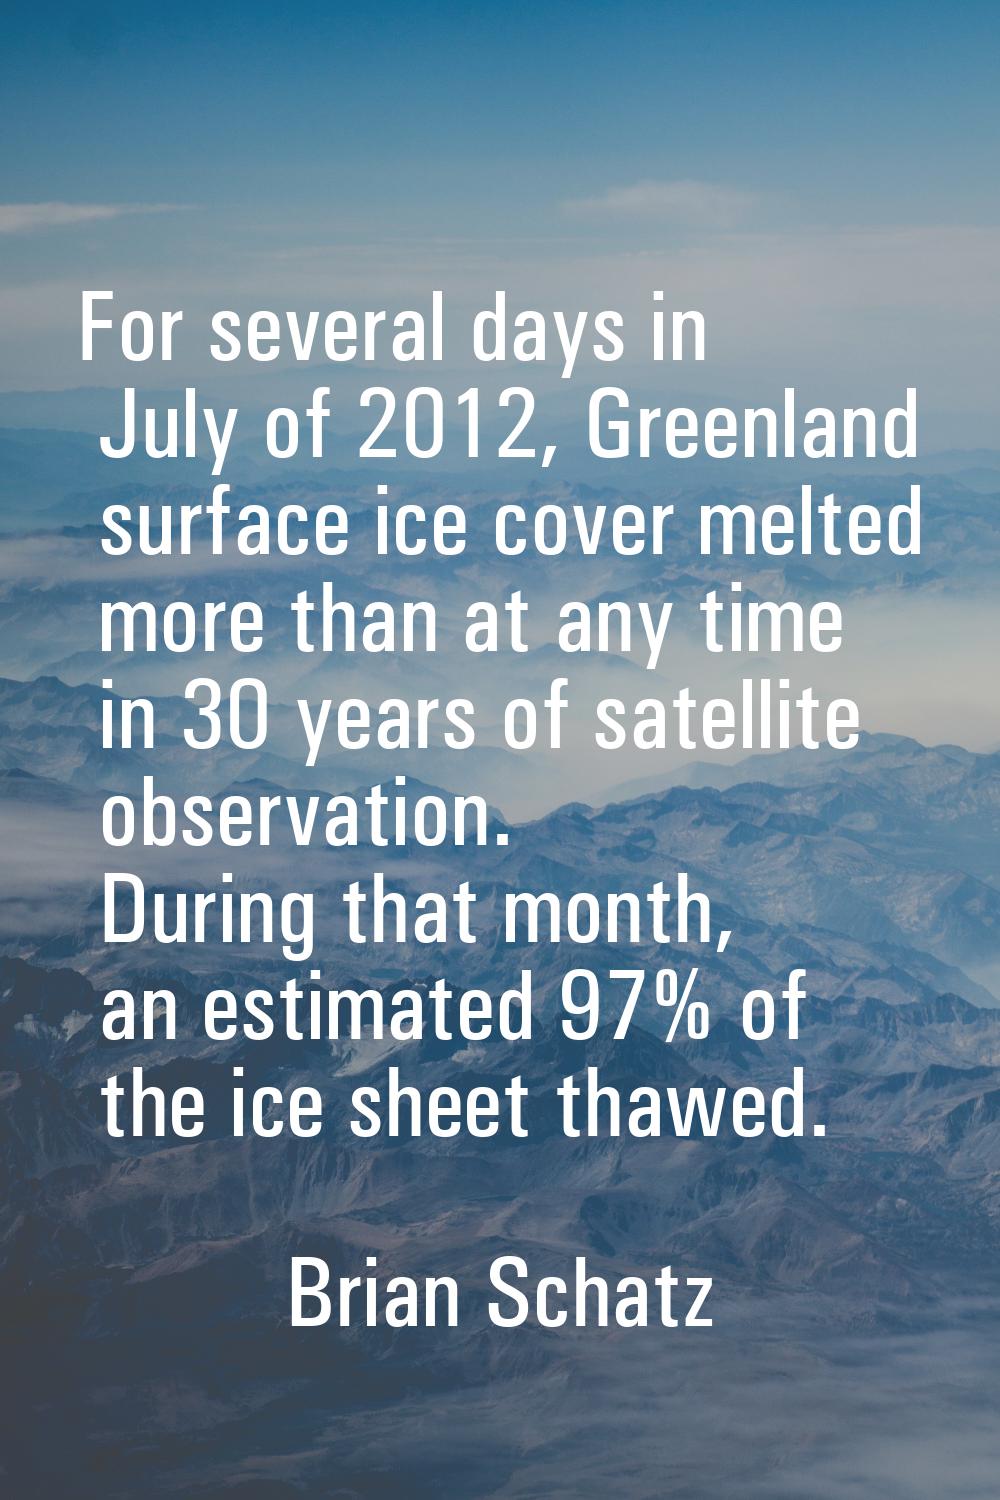 For several days in July of 2012, Greenland surface ice cover melted more than at any time in 30 ye